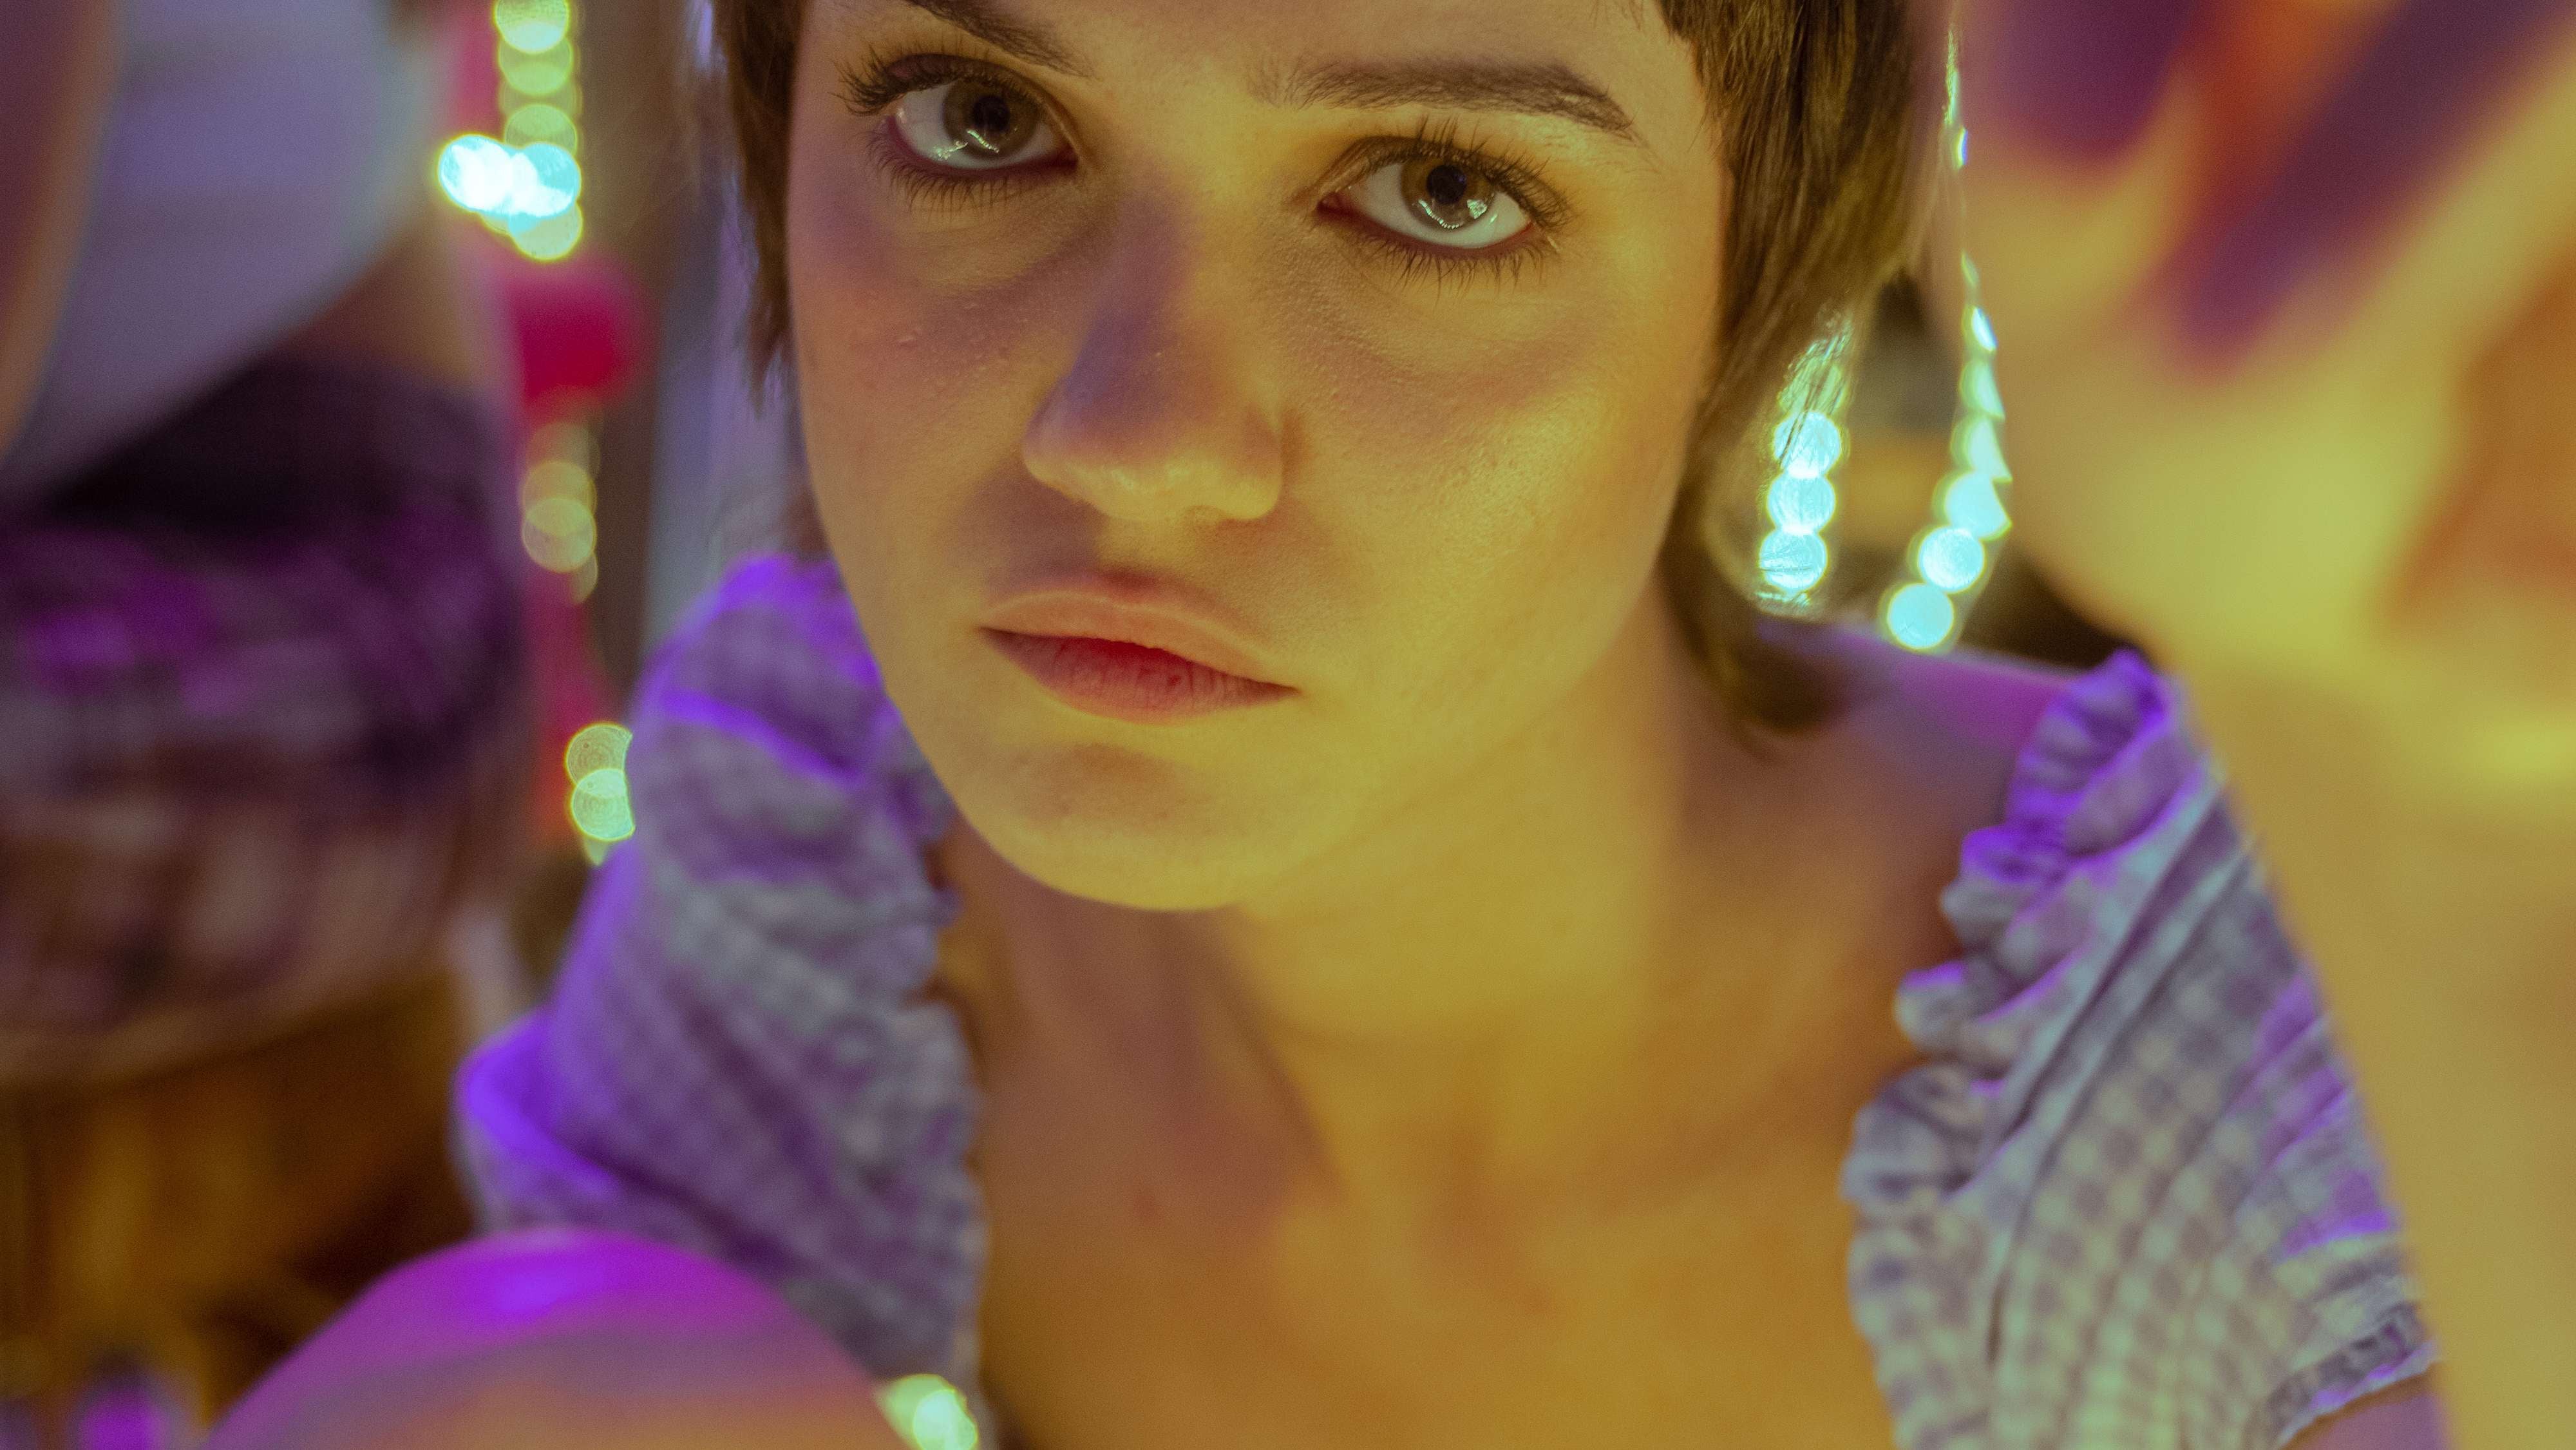 A women surrounded by fluorescent lights stars directly at the camera.